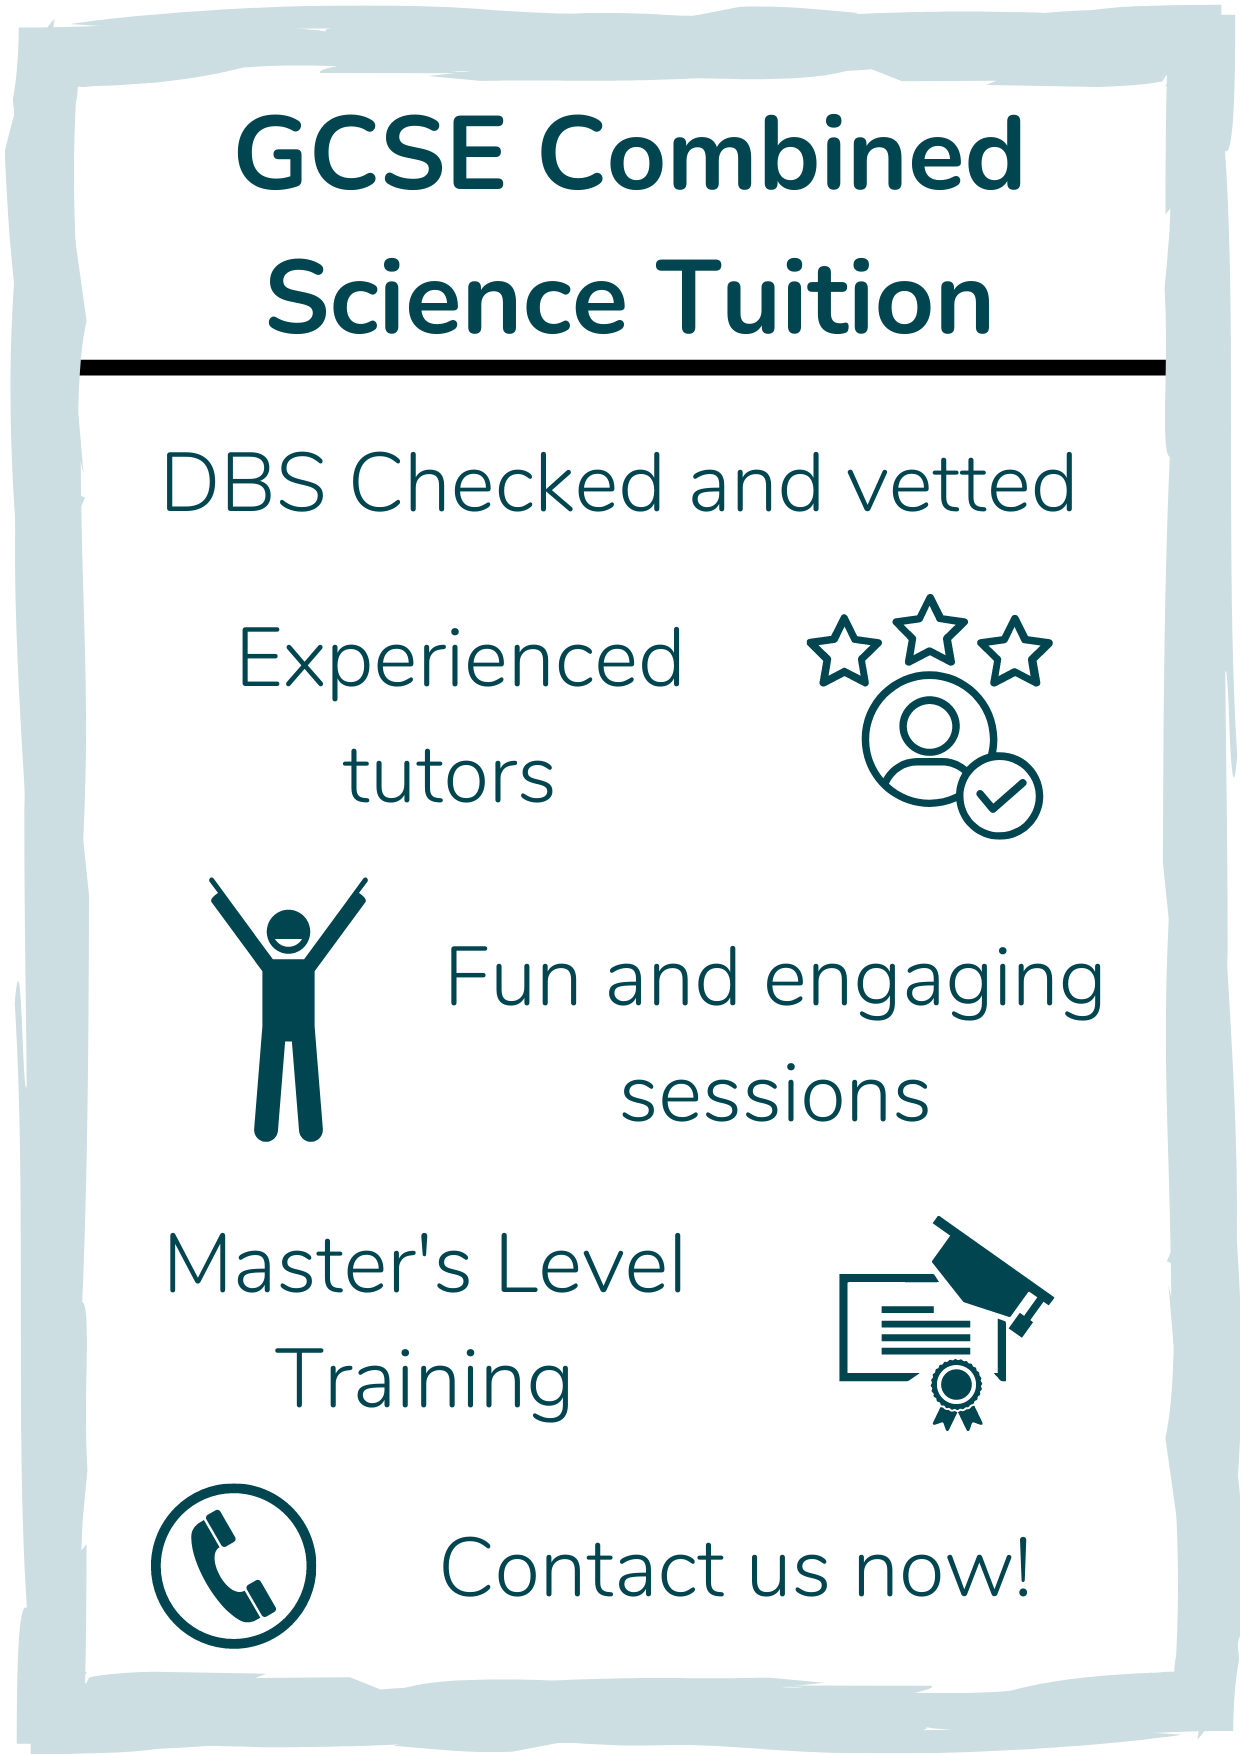 GCSE Combined Science Tutoring Tuition